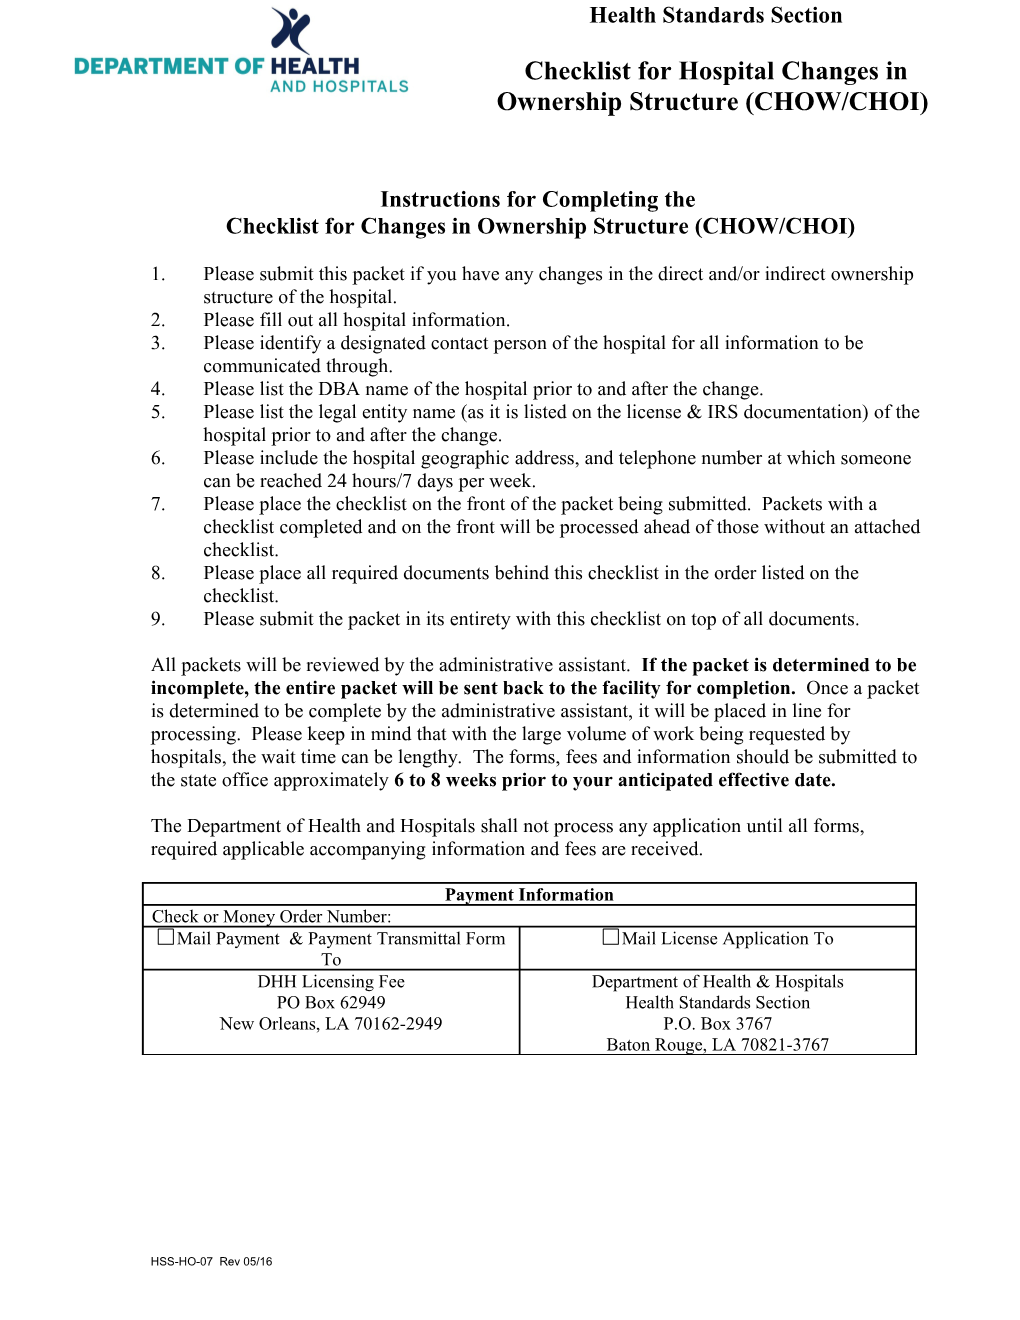 Checklist for Hospital Changes in Ownership Structure (CHOW/CHOI)